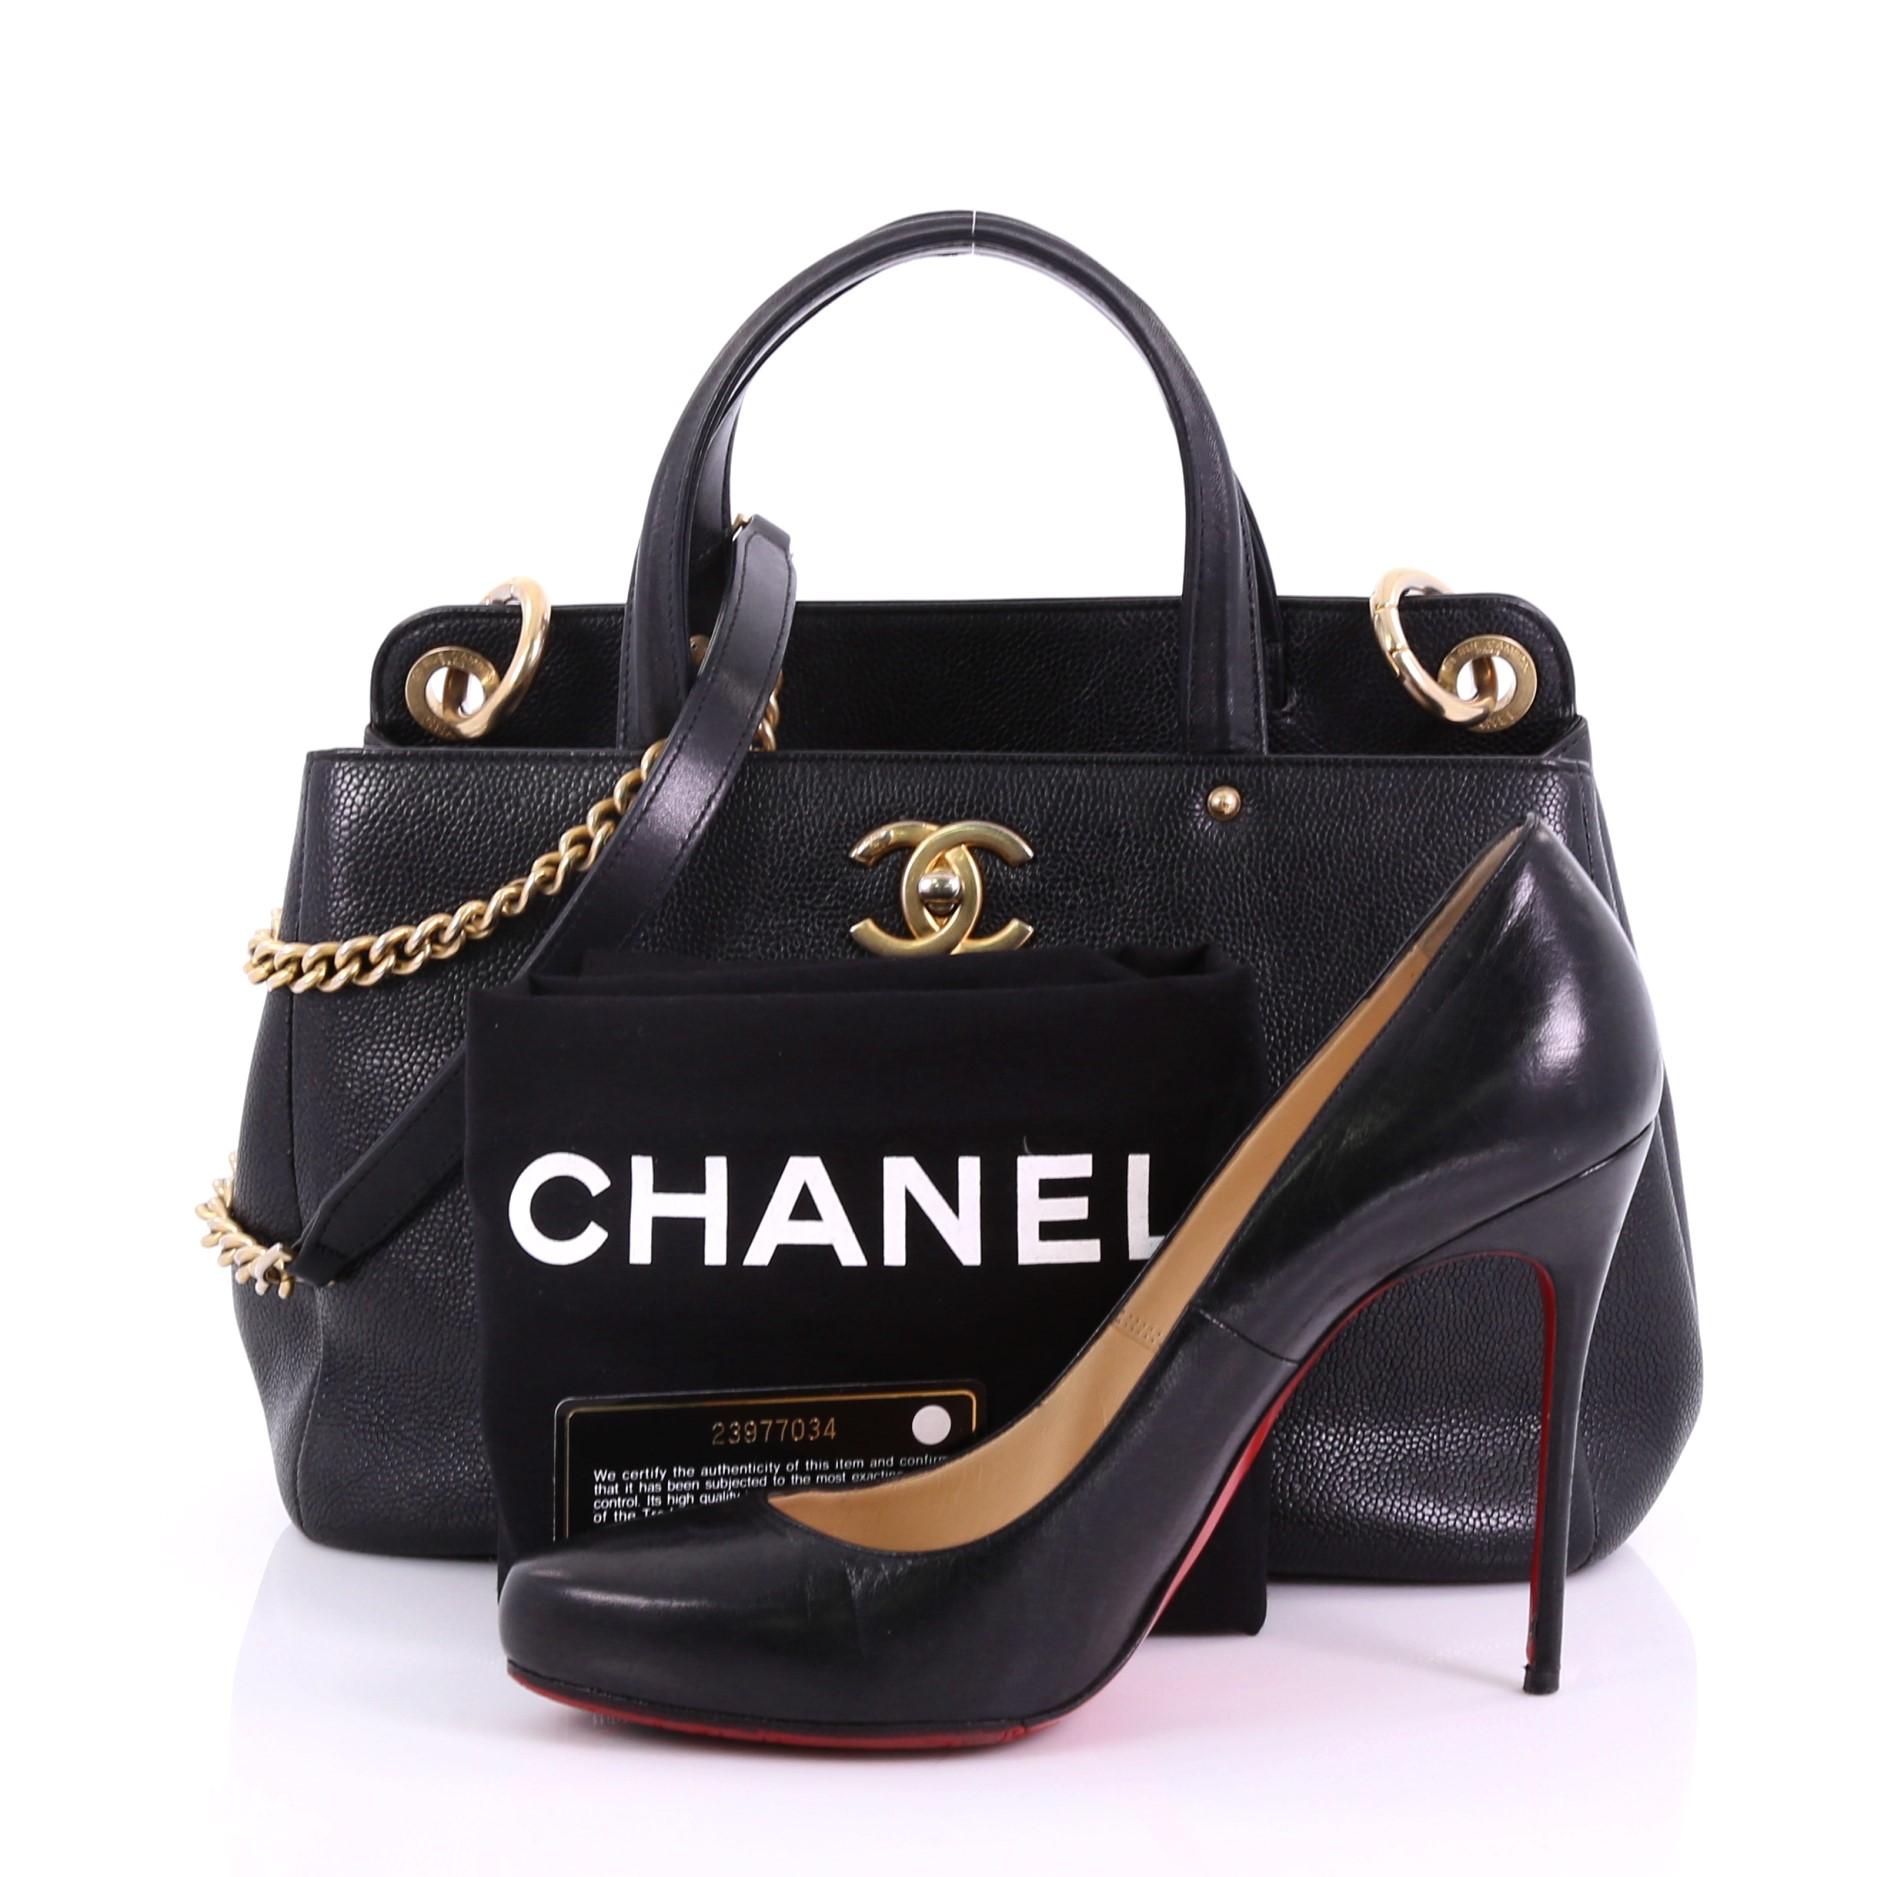 This Chanel CC Lock Shopping Tote Caviar Small, crafted in black caviar leather, features dual top handles and gold-tone hardware. Its CC turn lock closure opens to a black fabric interior with zip and slip pockets. Hologram sticker reads: 23977034.